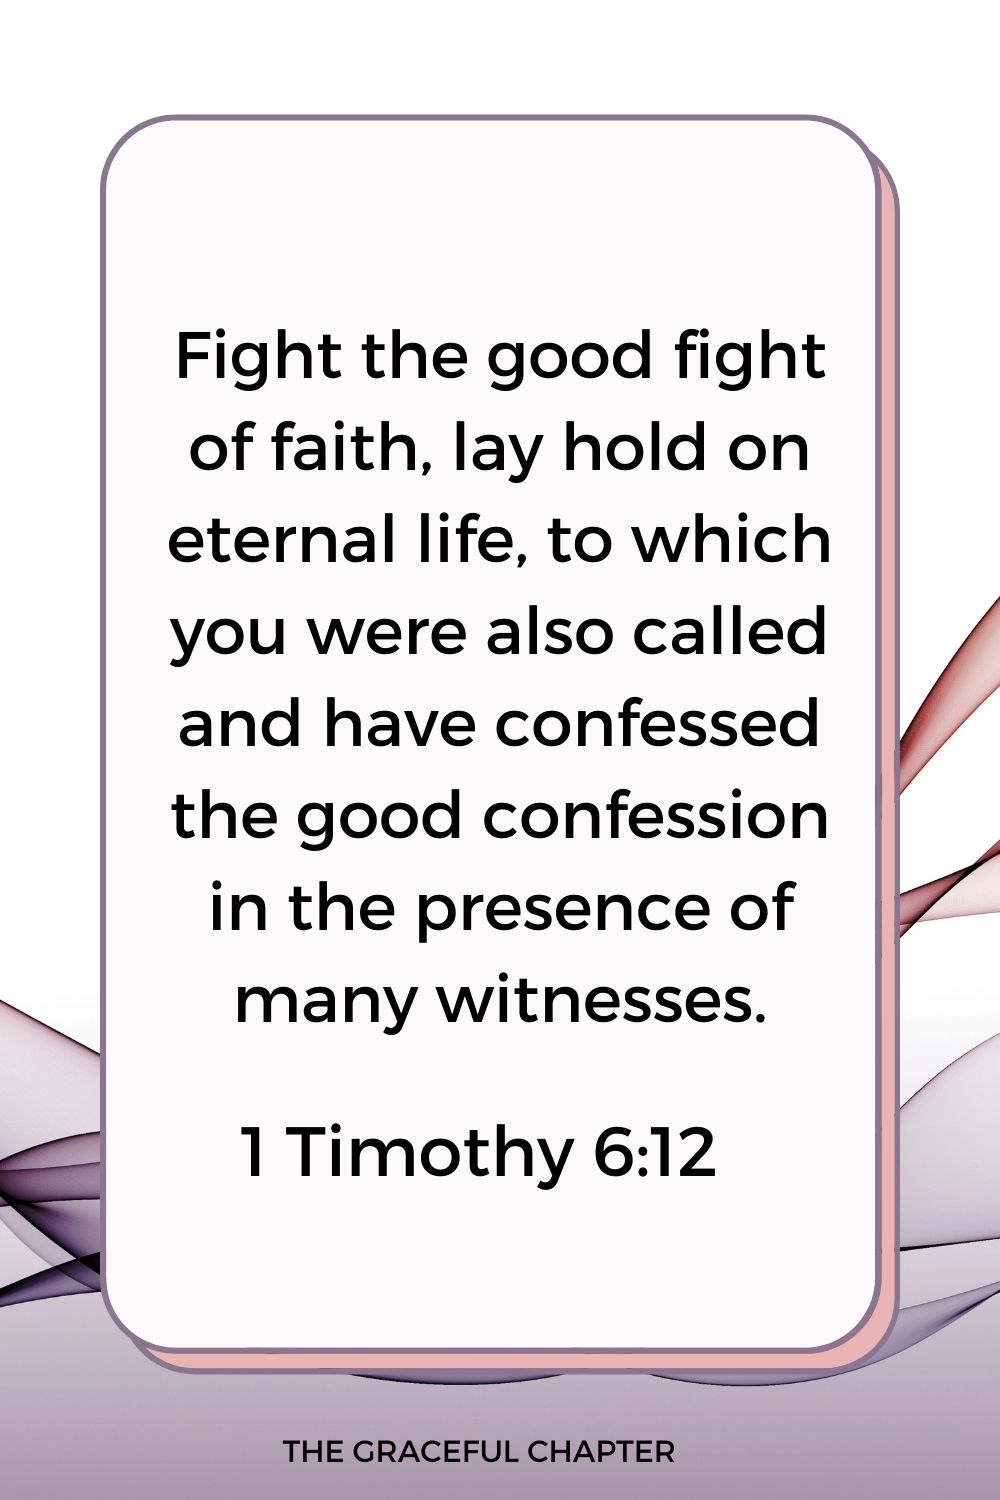 Fight the good fight of faith, lay hold on eternal life, to which you were also called and have confessed the good confession in the presence of many witnesses. 1 Timothy 6:12